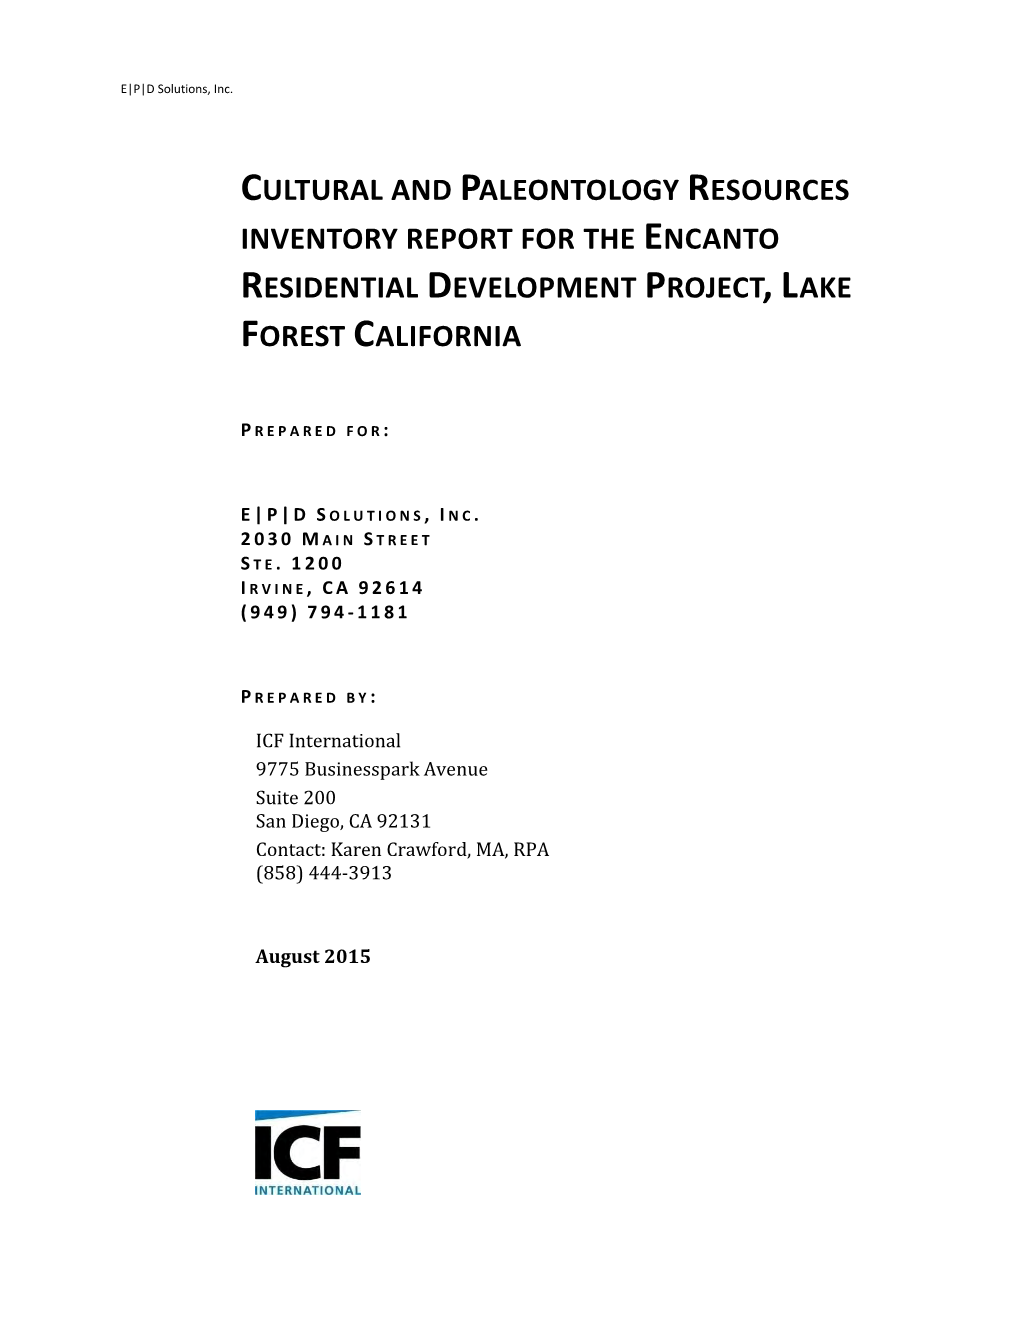 Cultural and Paleontology Resources Inventory Report for the Encanto Residential Development Project, Lake Forest California